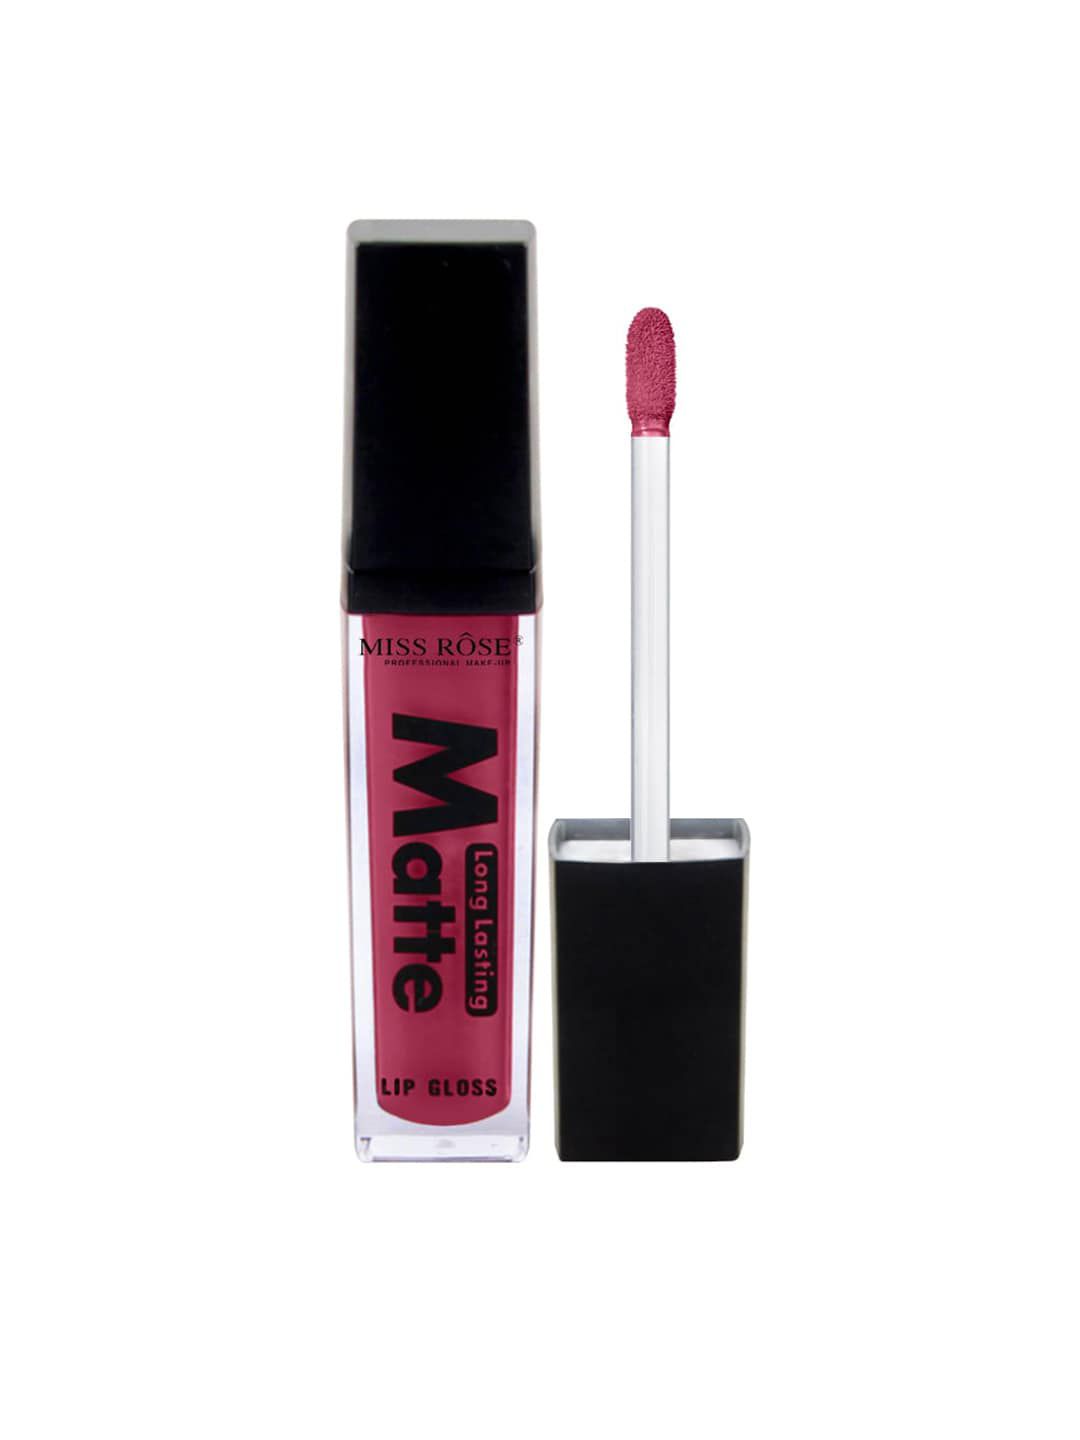 MISS ROSE Matte Long Lasting LipGloss 7701-002M 03 20 gm Price in India